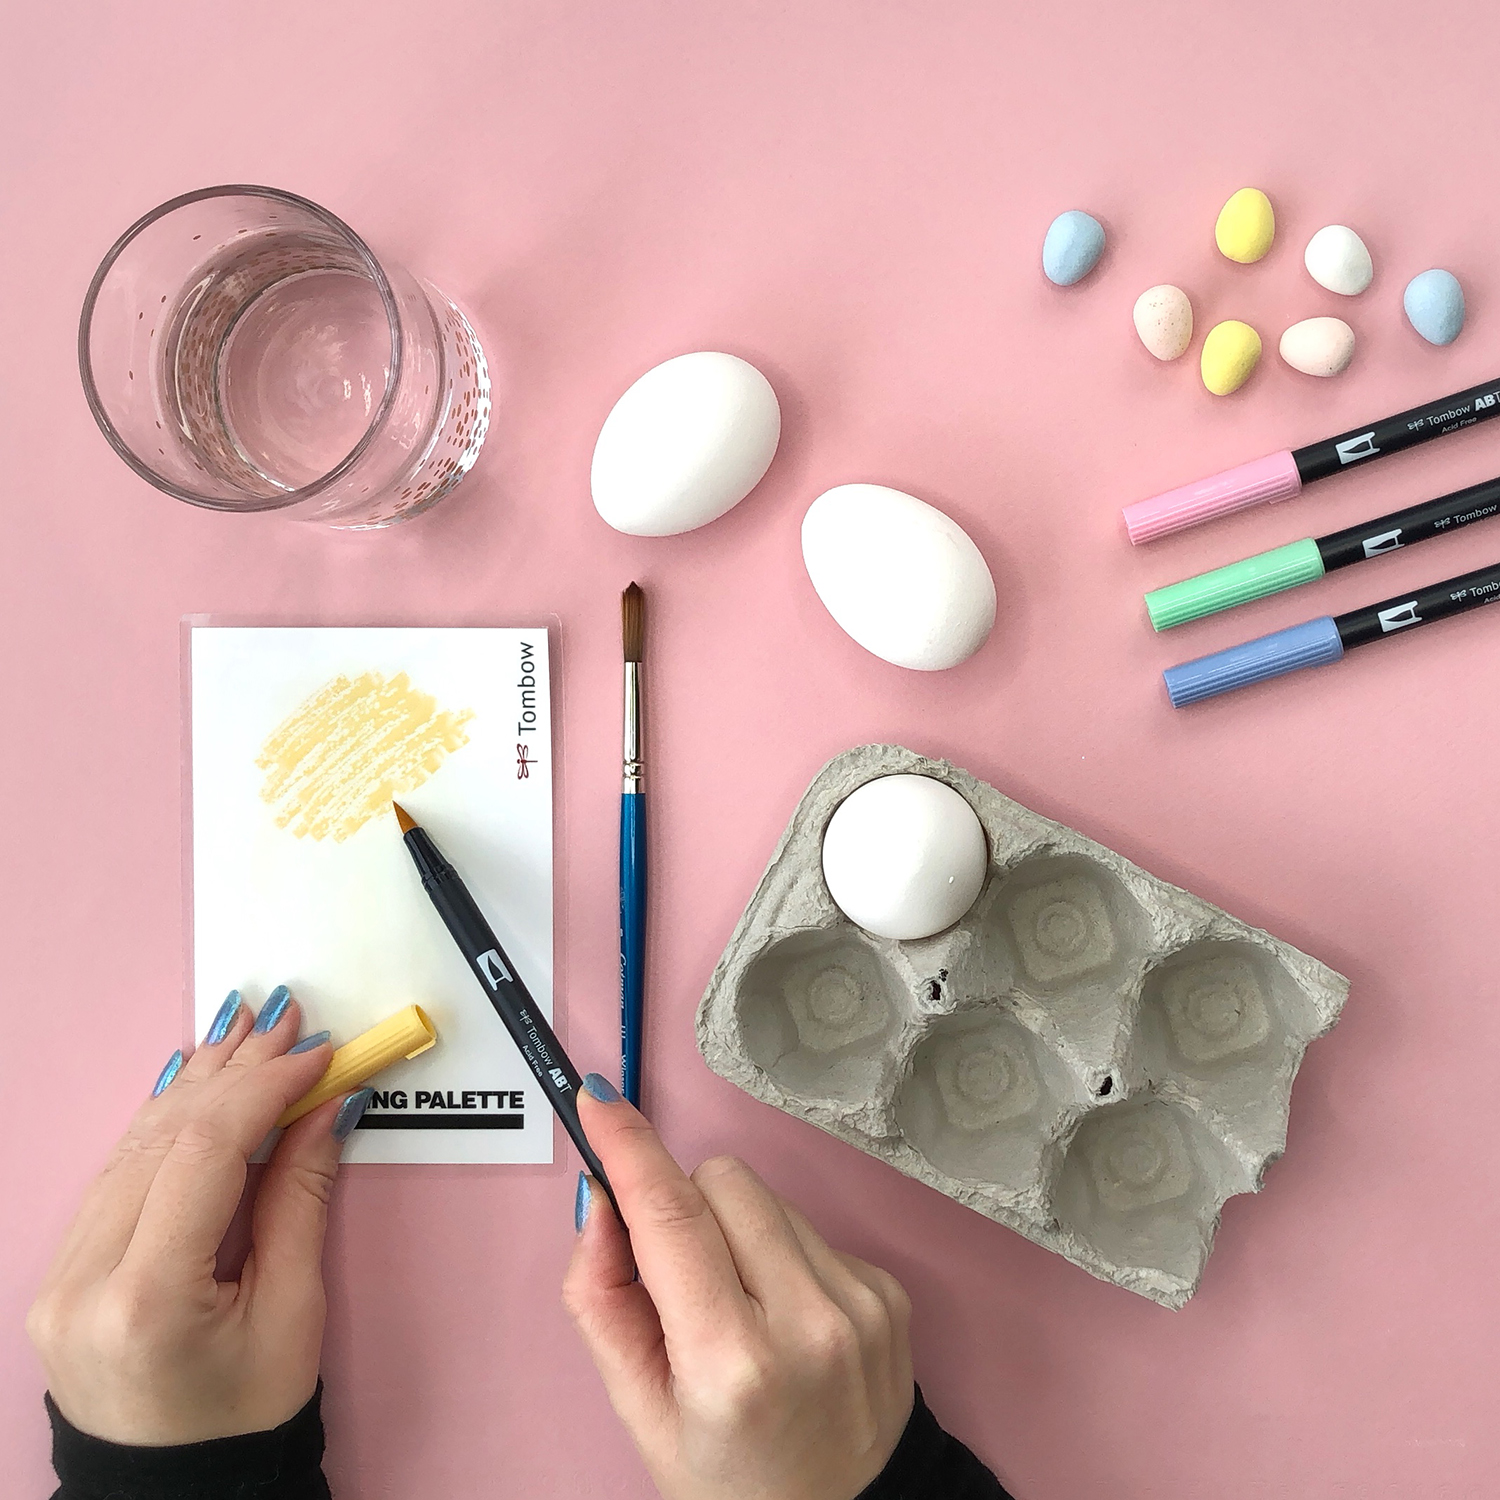 3 Watercolor-Look Easter Egg Decorating Techniques Using Tombow Dual Brush Pens by Jessica of BrownPaperBunny